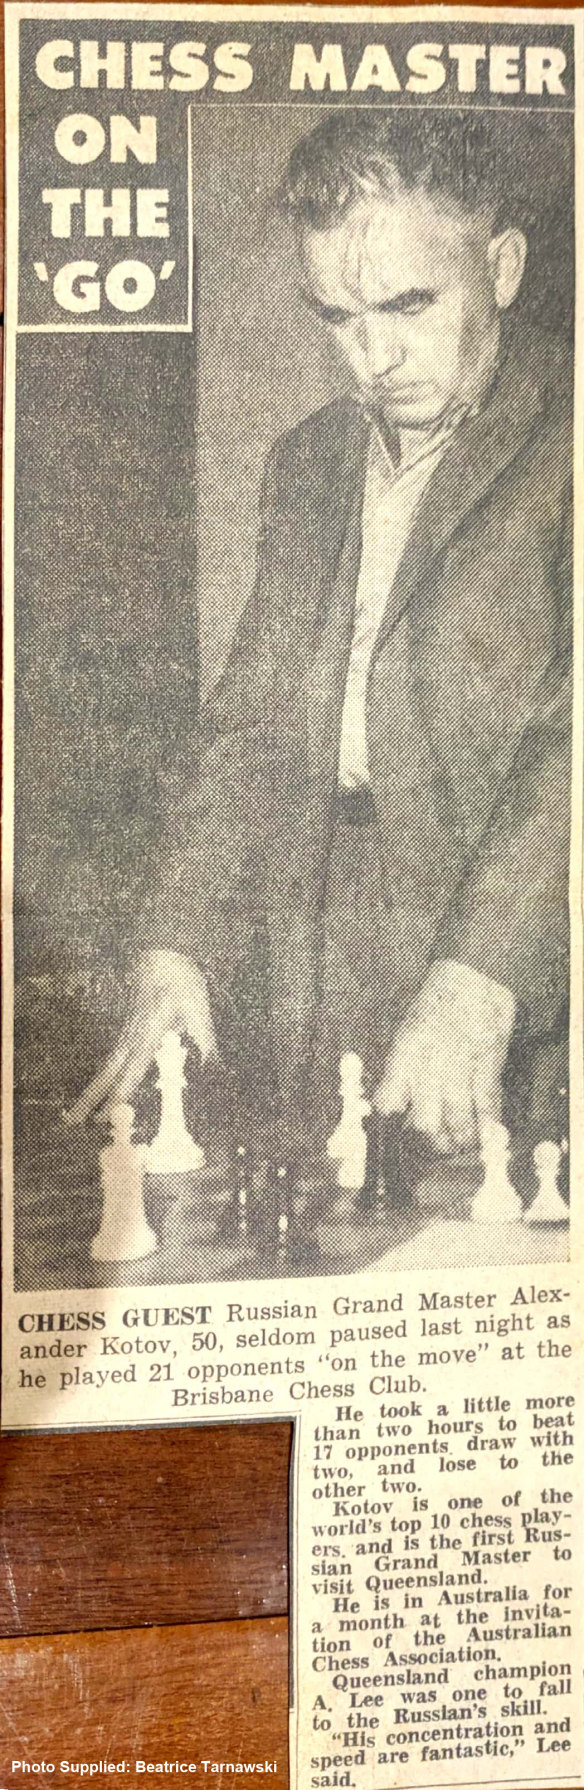 News clipping of Russian chess Grand Champion Alexander Kotov in Brisbane in 1963.